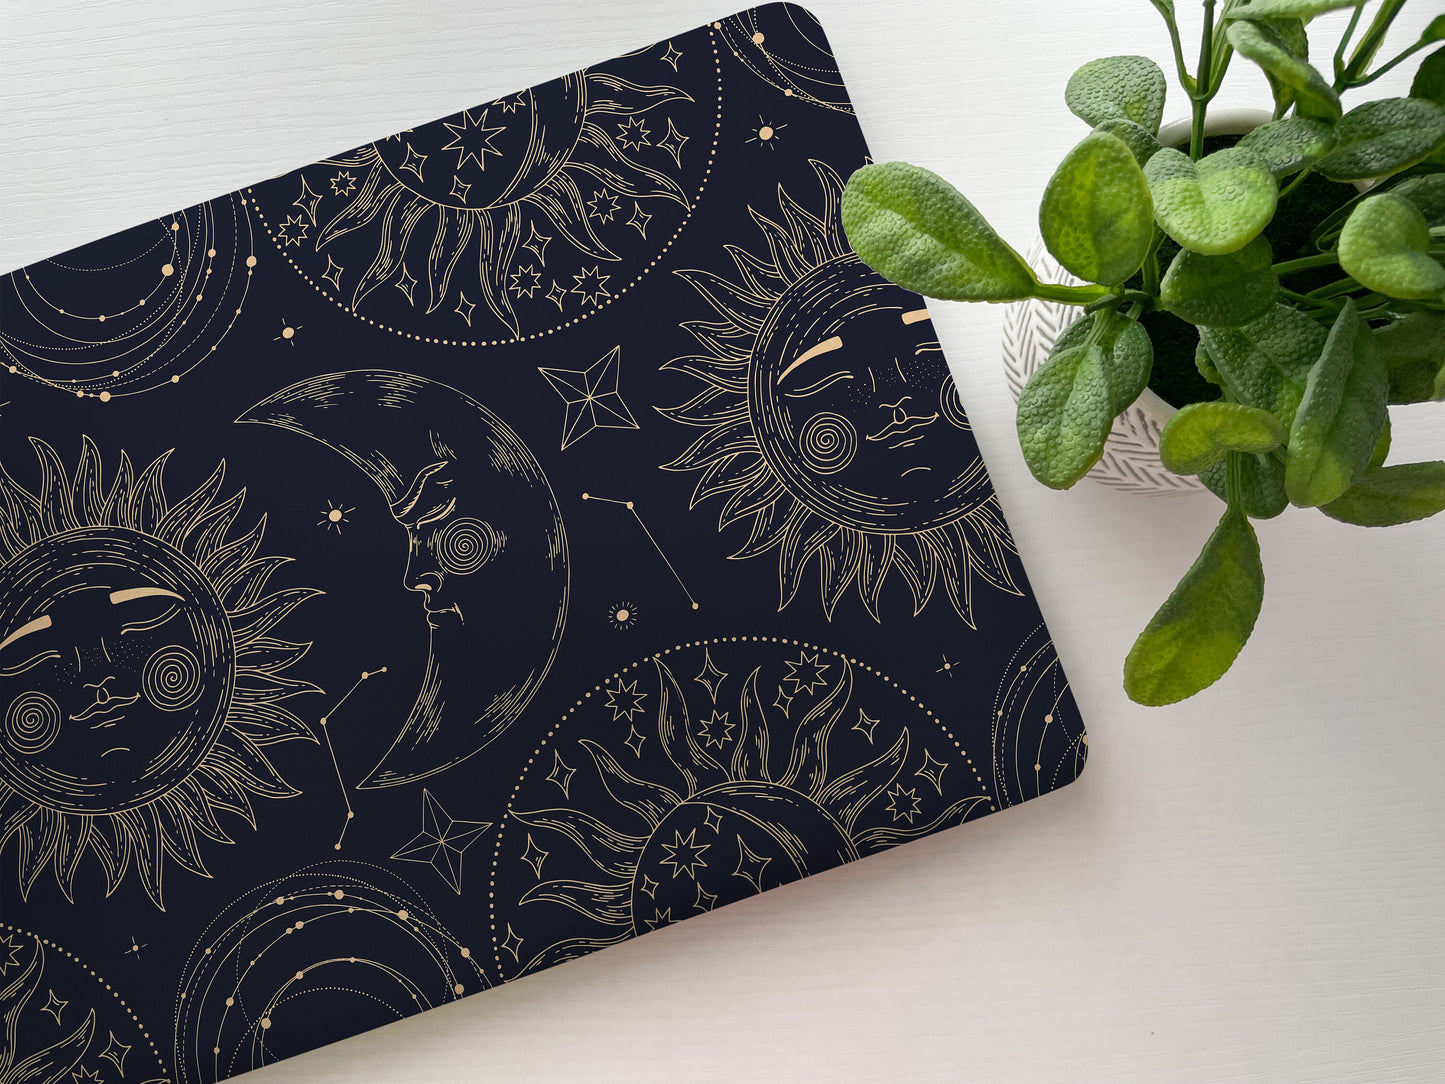 Sun And Moon Laptop Skin, Laptop Cover, Laptop Skins, Removable Laptop Skins, Laptop Decal, Customized Laptop Accessory Laptop Sticker 41 - James & Inks